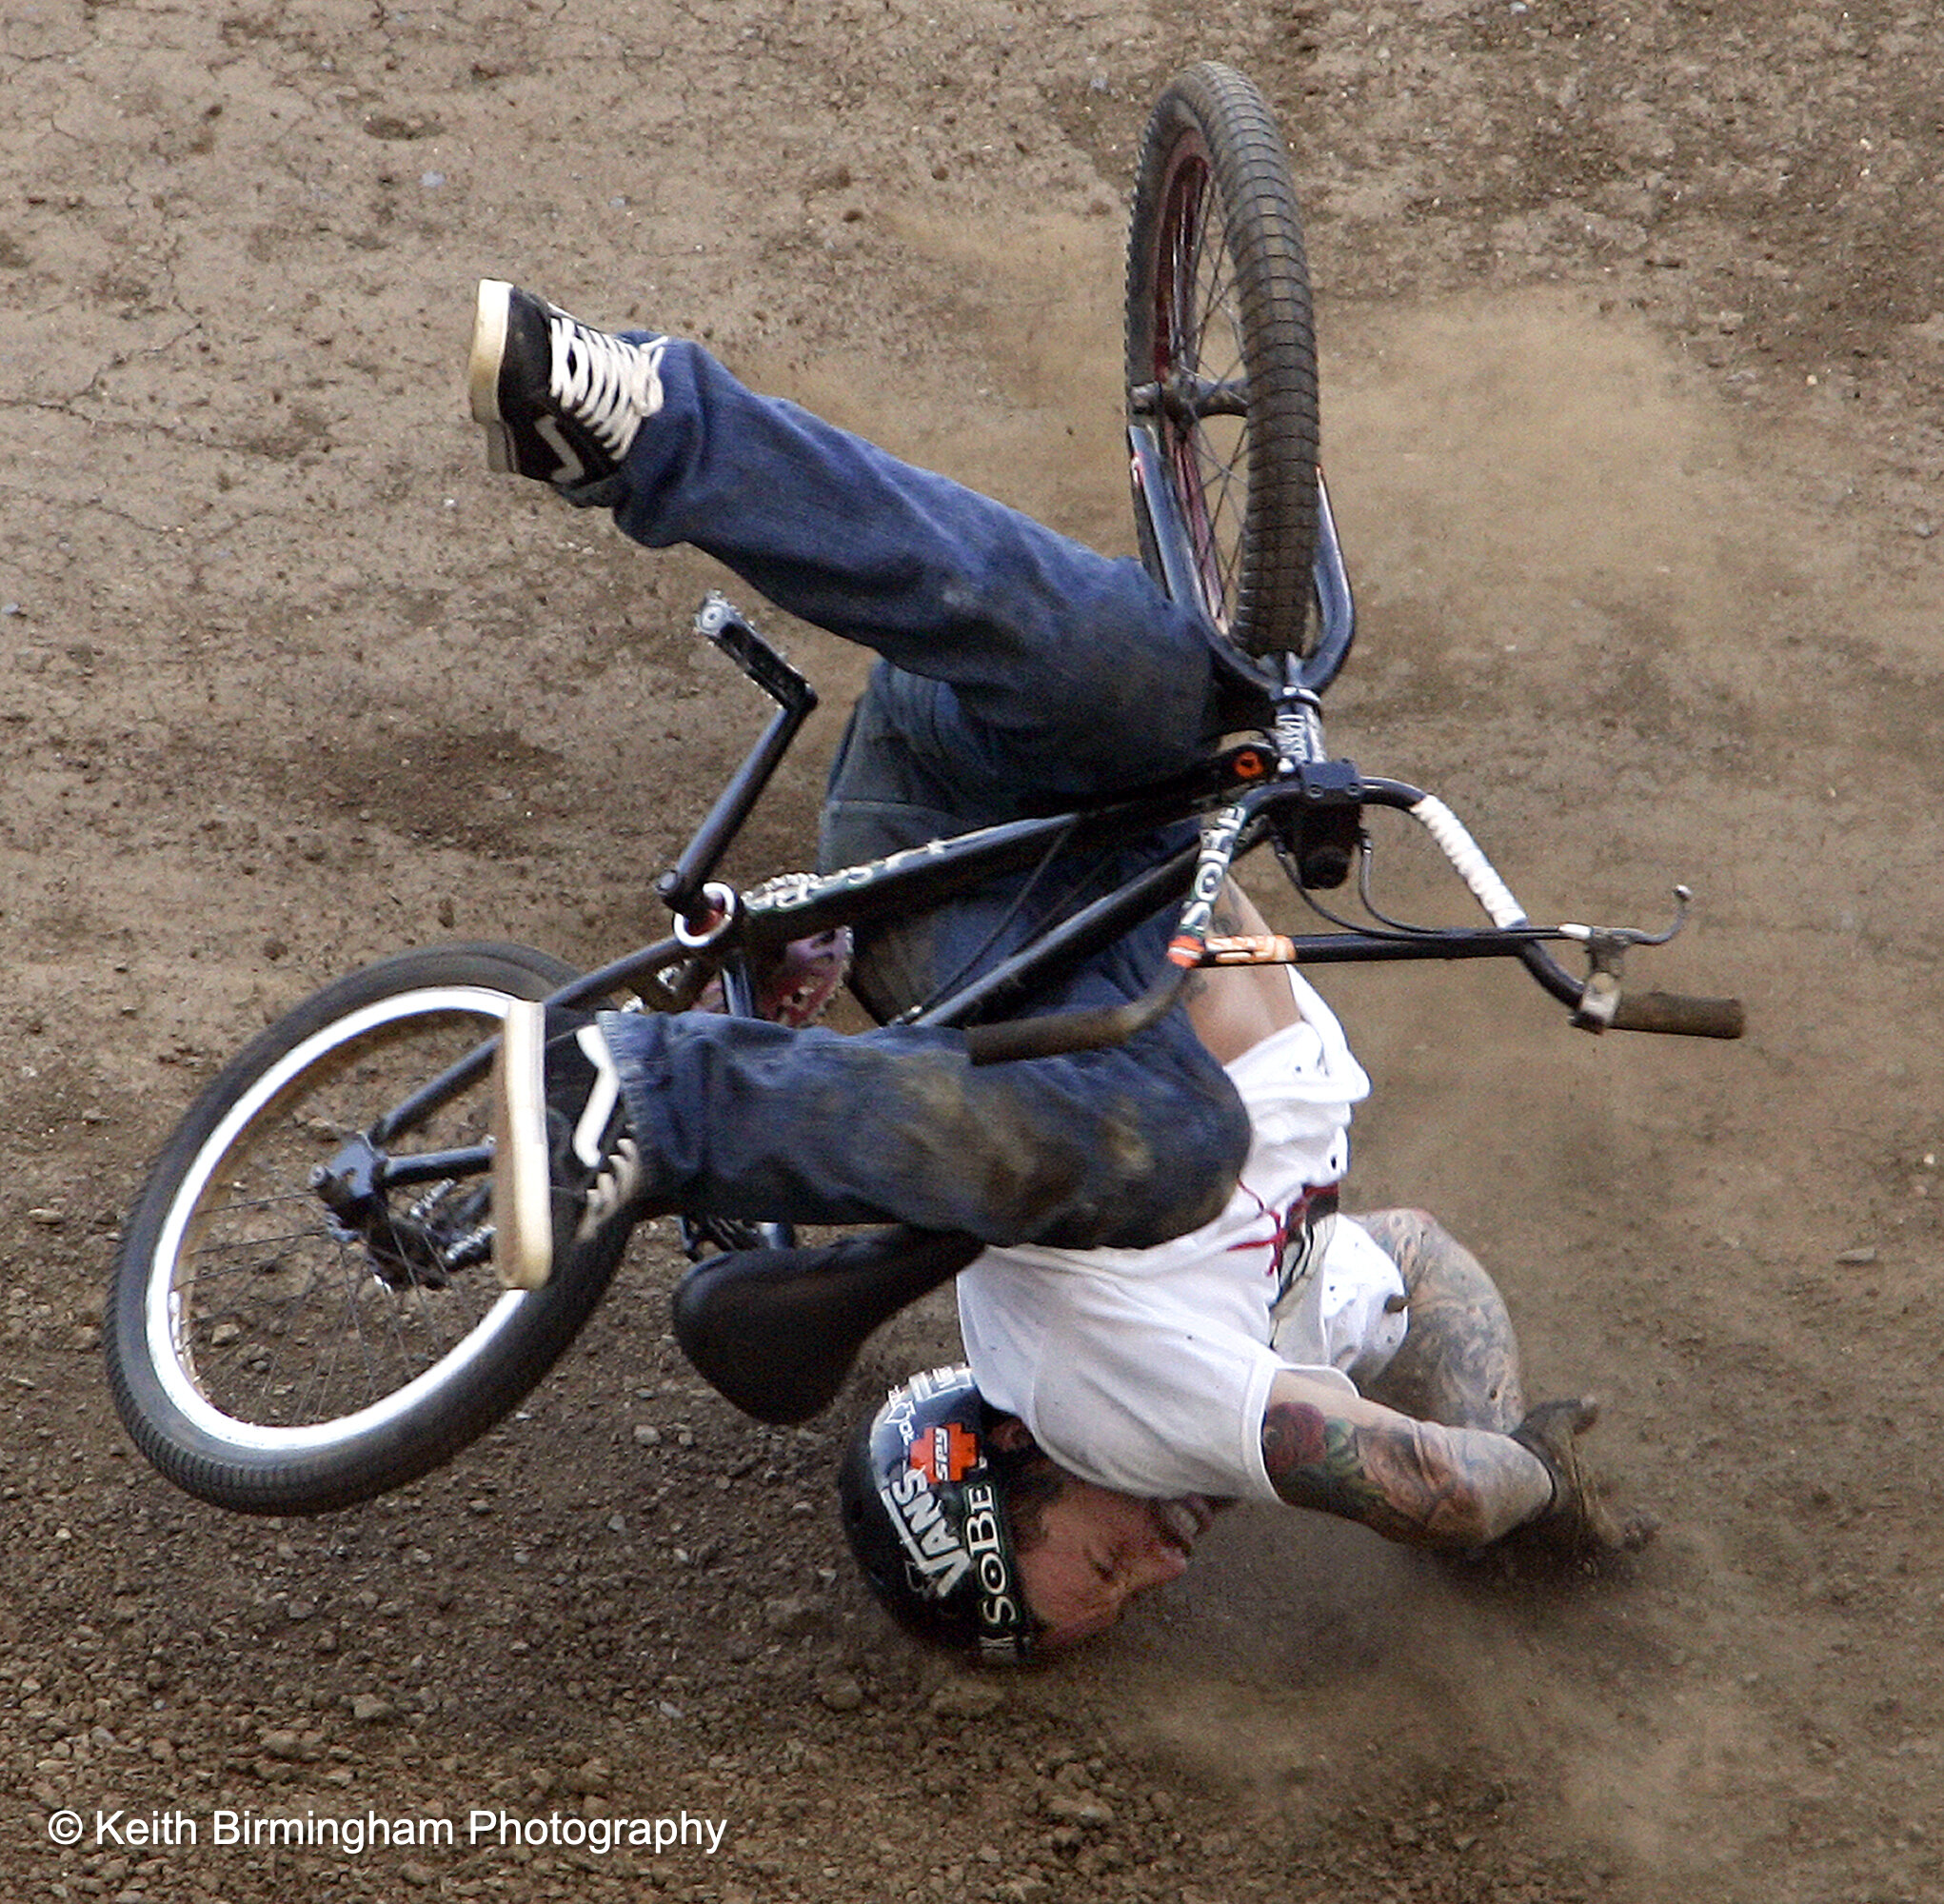  Cory Nastazio of Riverside,Calif., crashes hard on his face during the first round of the BMX Freestyle Dirt Finals during the Eleventh X Games at the Home Depot Center in Carson ,Calif., August 6. 2005. (Photo by Keith Birmingham, Pasadena Star-New